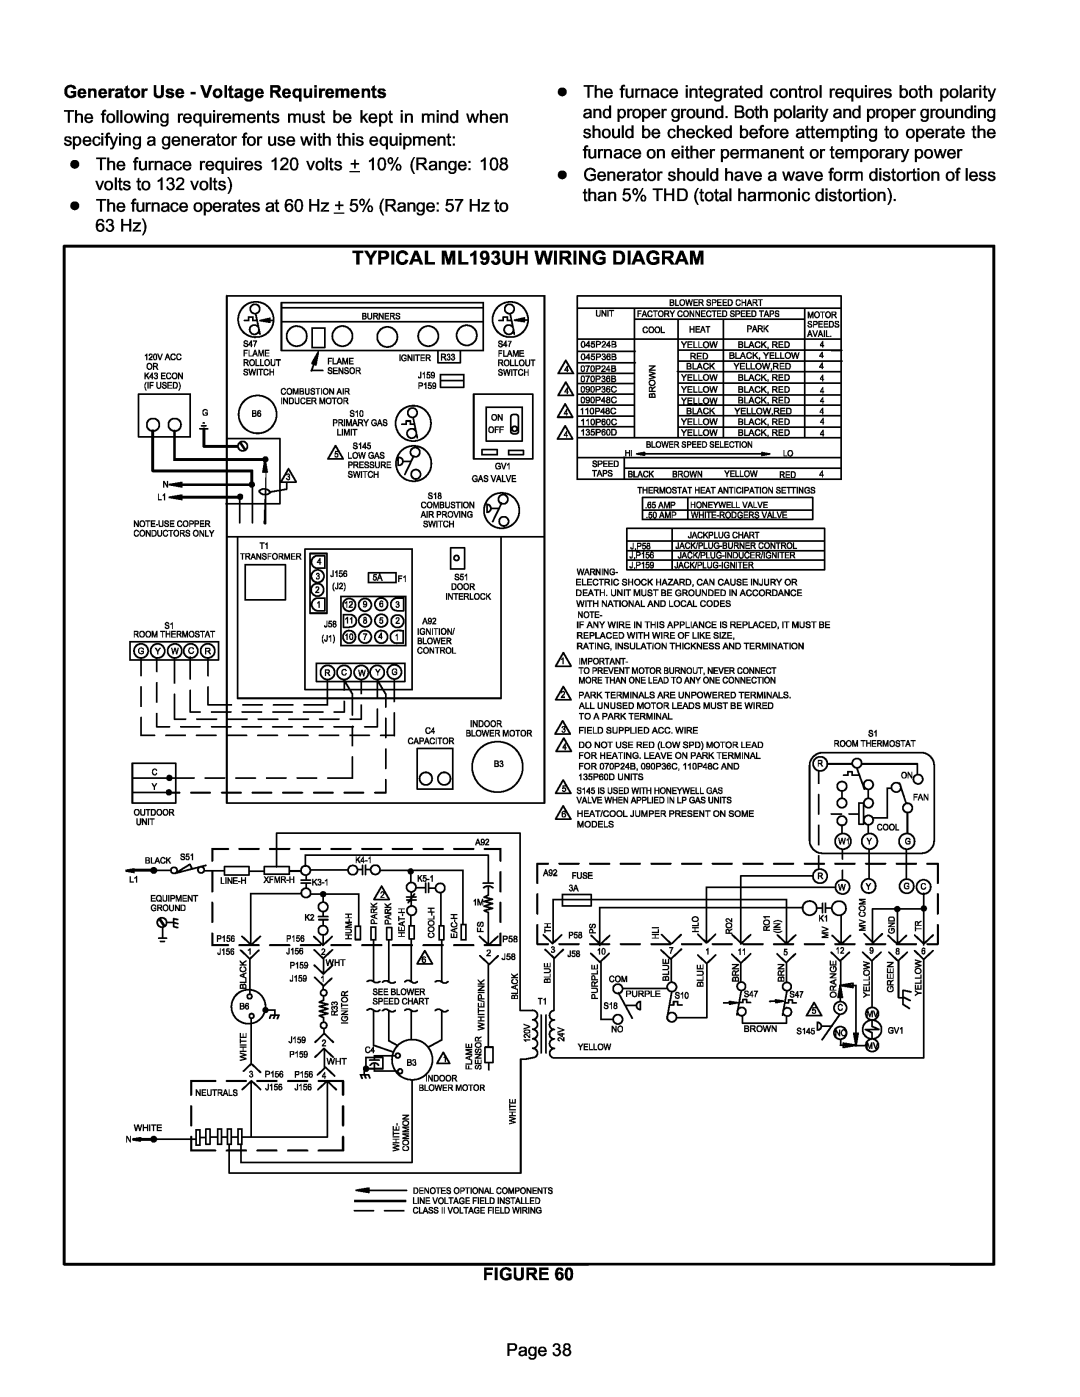 Lennox International Inc installation instructions TYPICAL ML193UH WIRING DIAGRAM, Generator Use - Voltage Requirements 